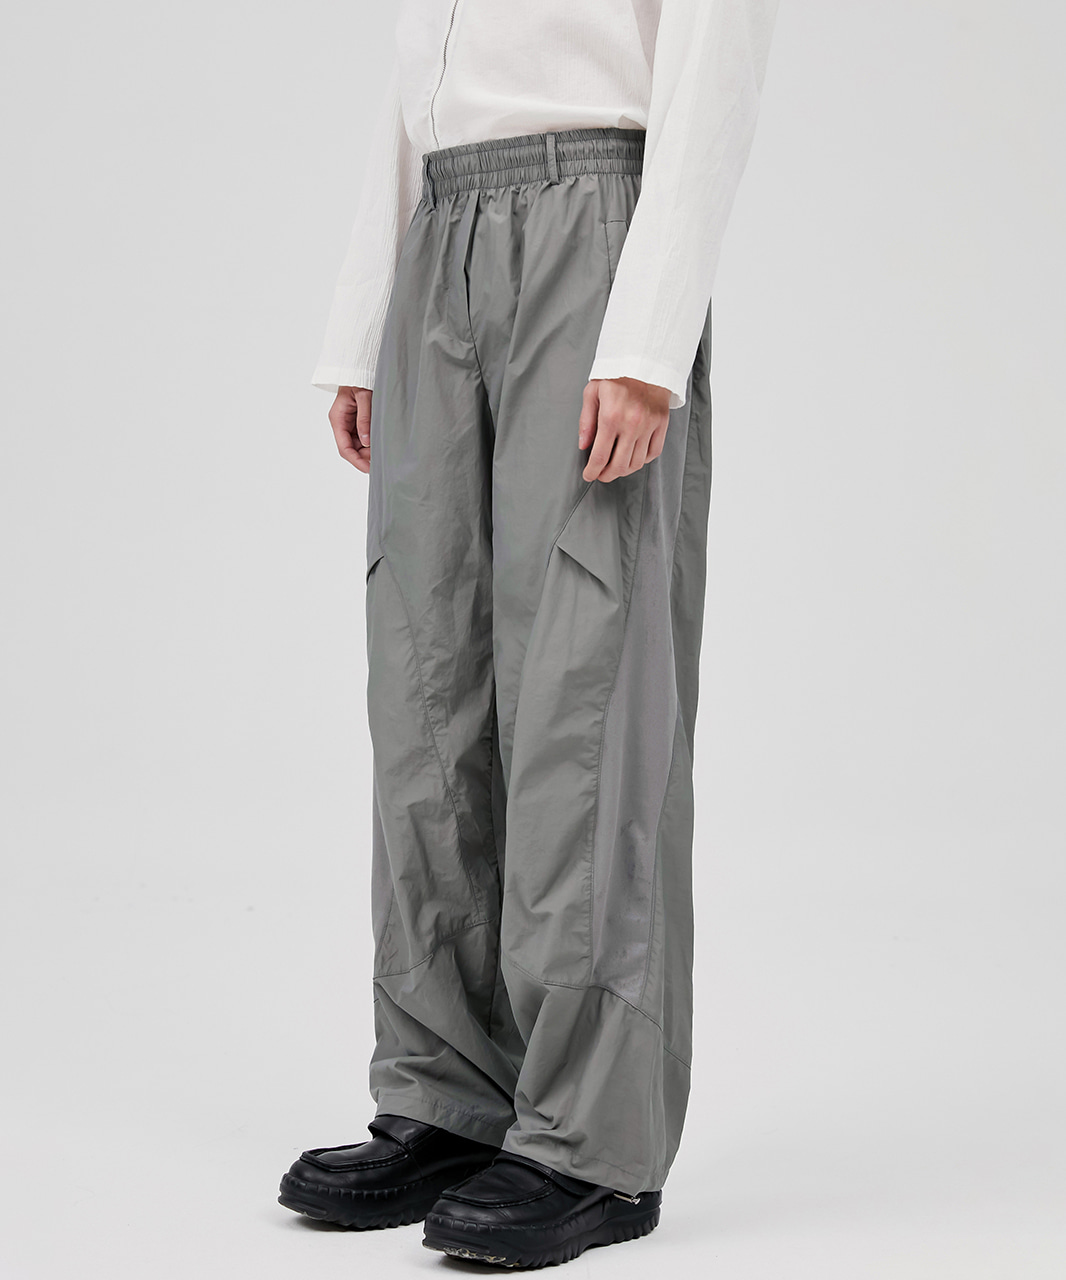 FLARE UP플레어업 5.Division Suede Line Pants - Dark Gray (FL-225)